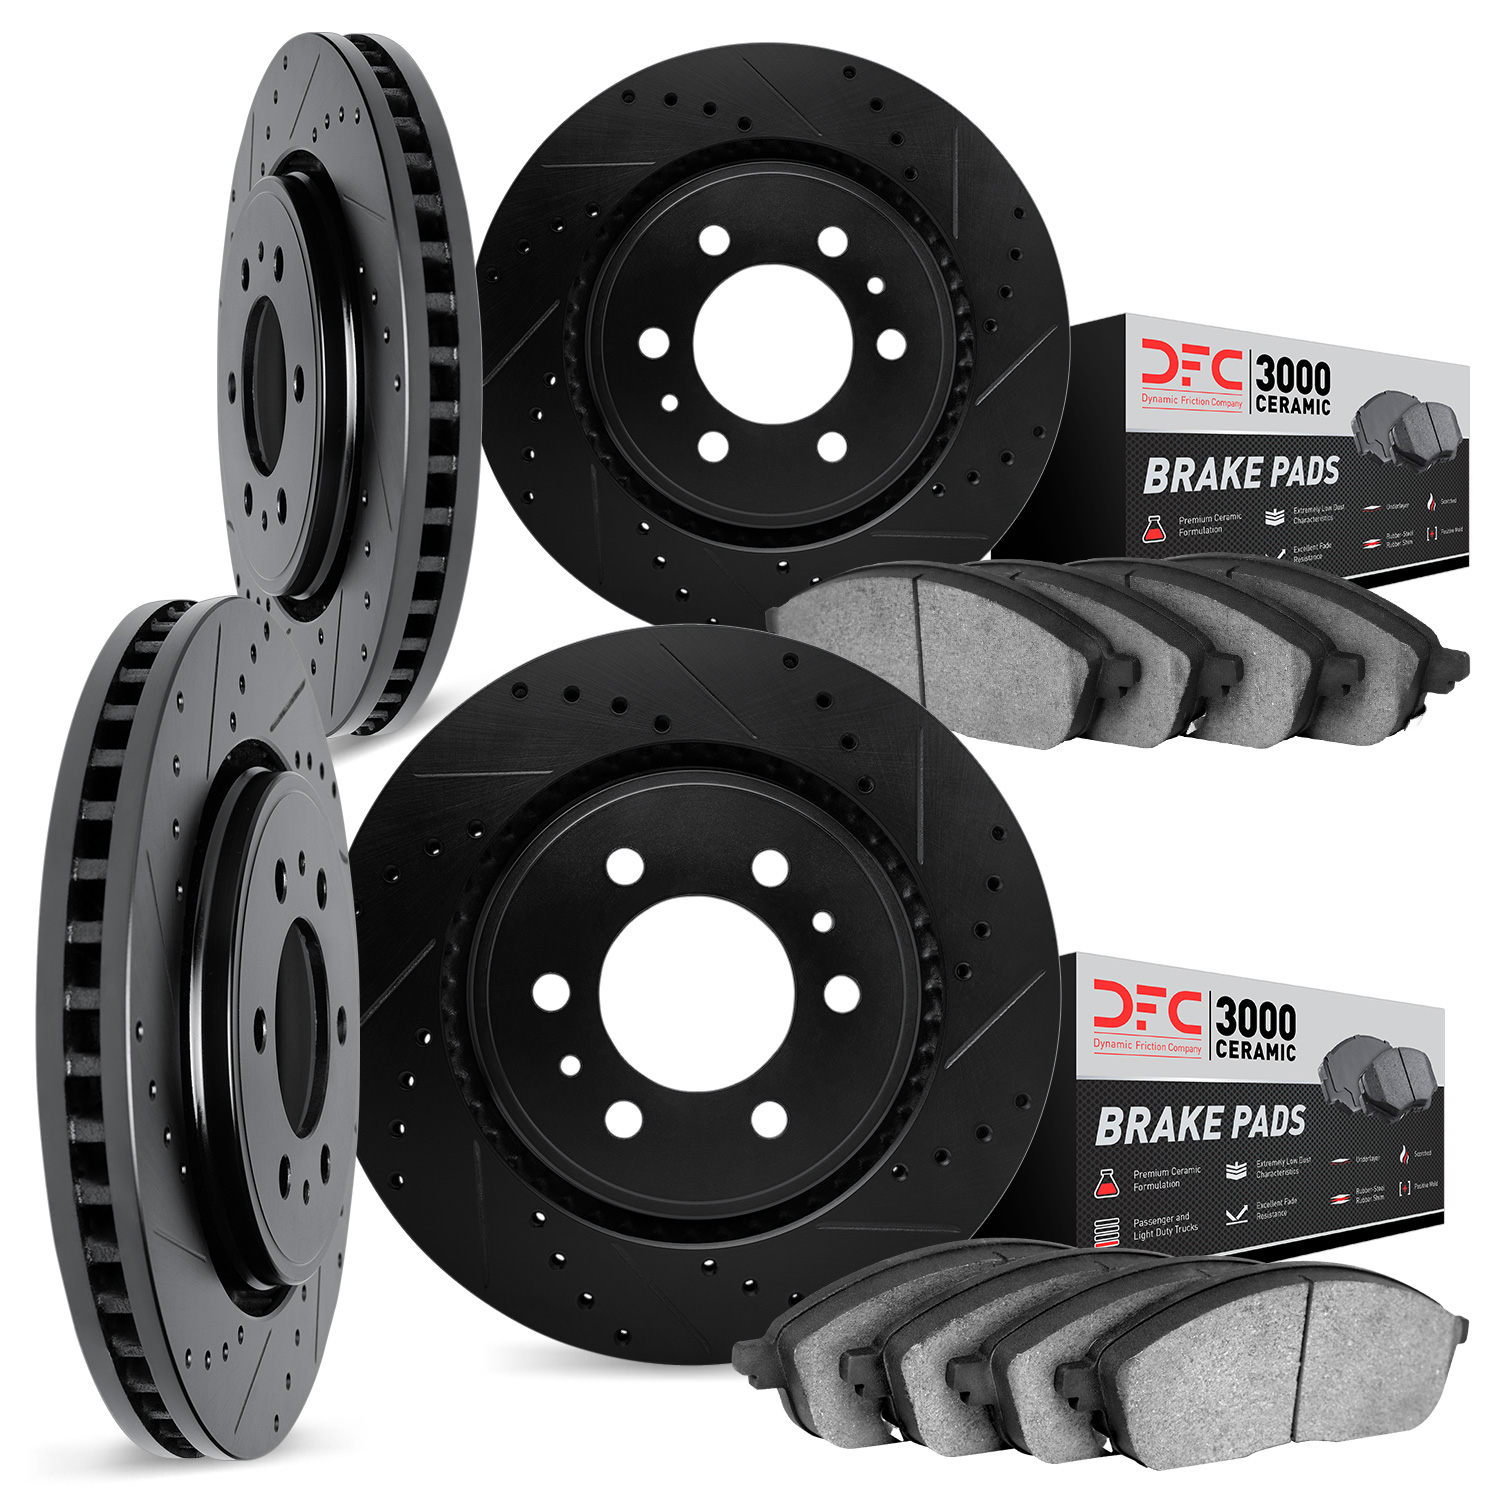 8304-68011 Drilled/Slotted Brake Rotors with 3000-Series Ceramic Brake Pads Kit [Black], Fits Select Infiniti/Nissan, Position: